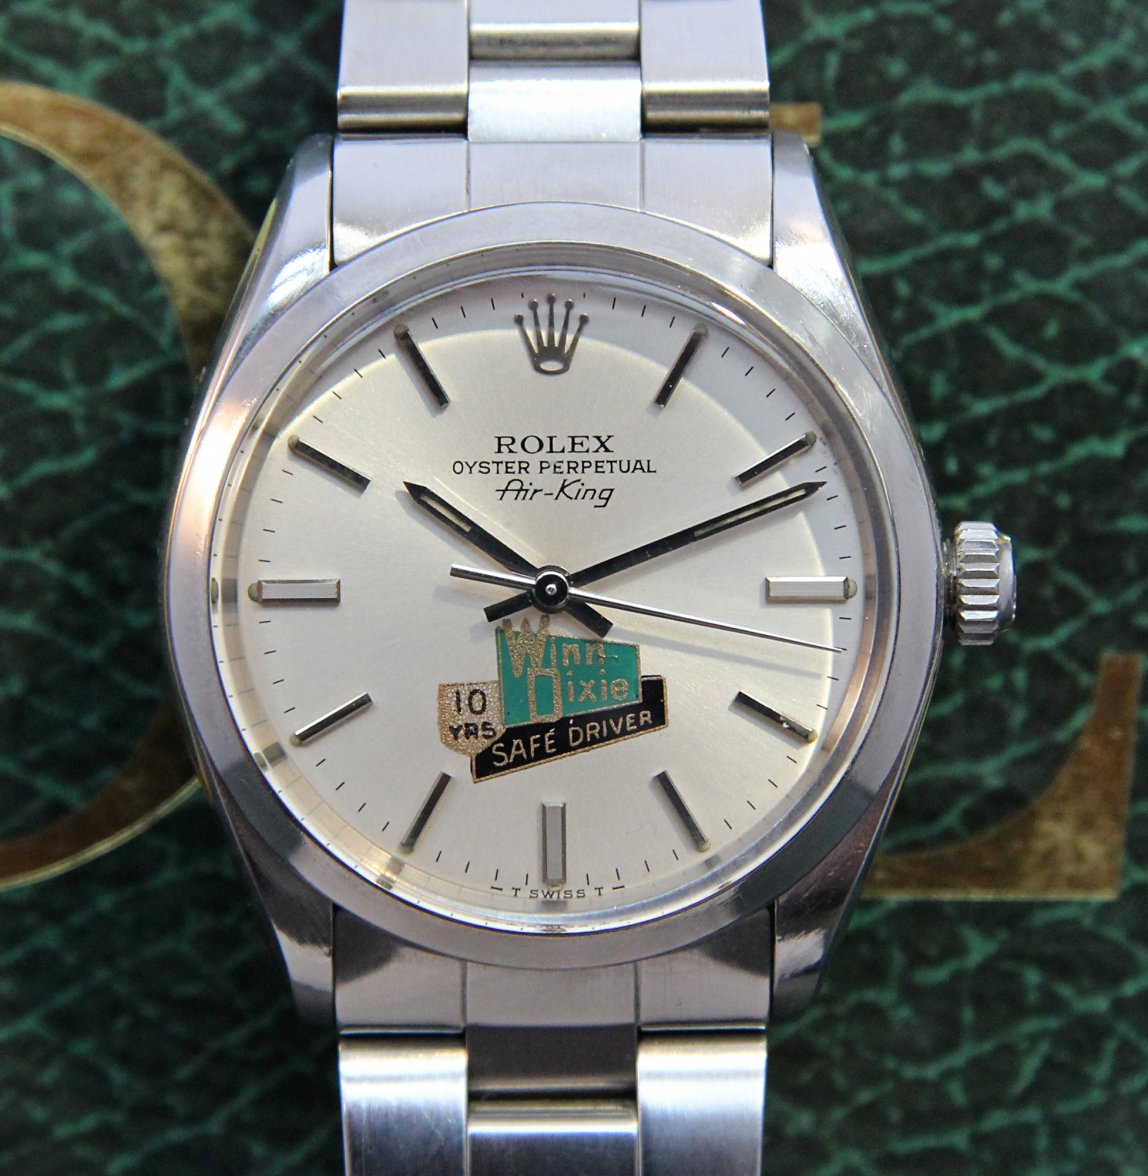 LIST: 5 logos that ruined perfectly good replica watches. Or did they?